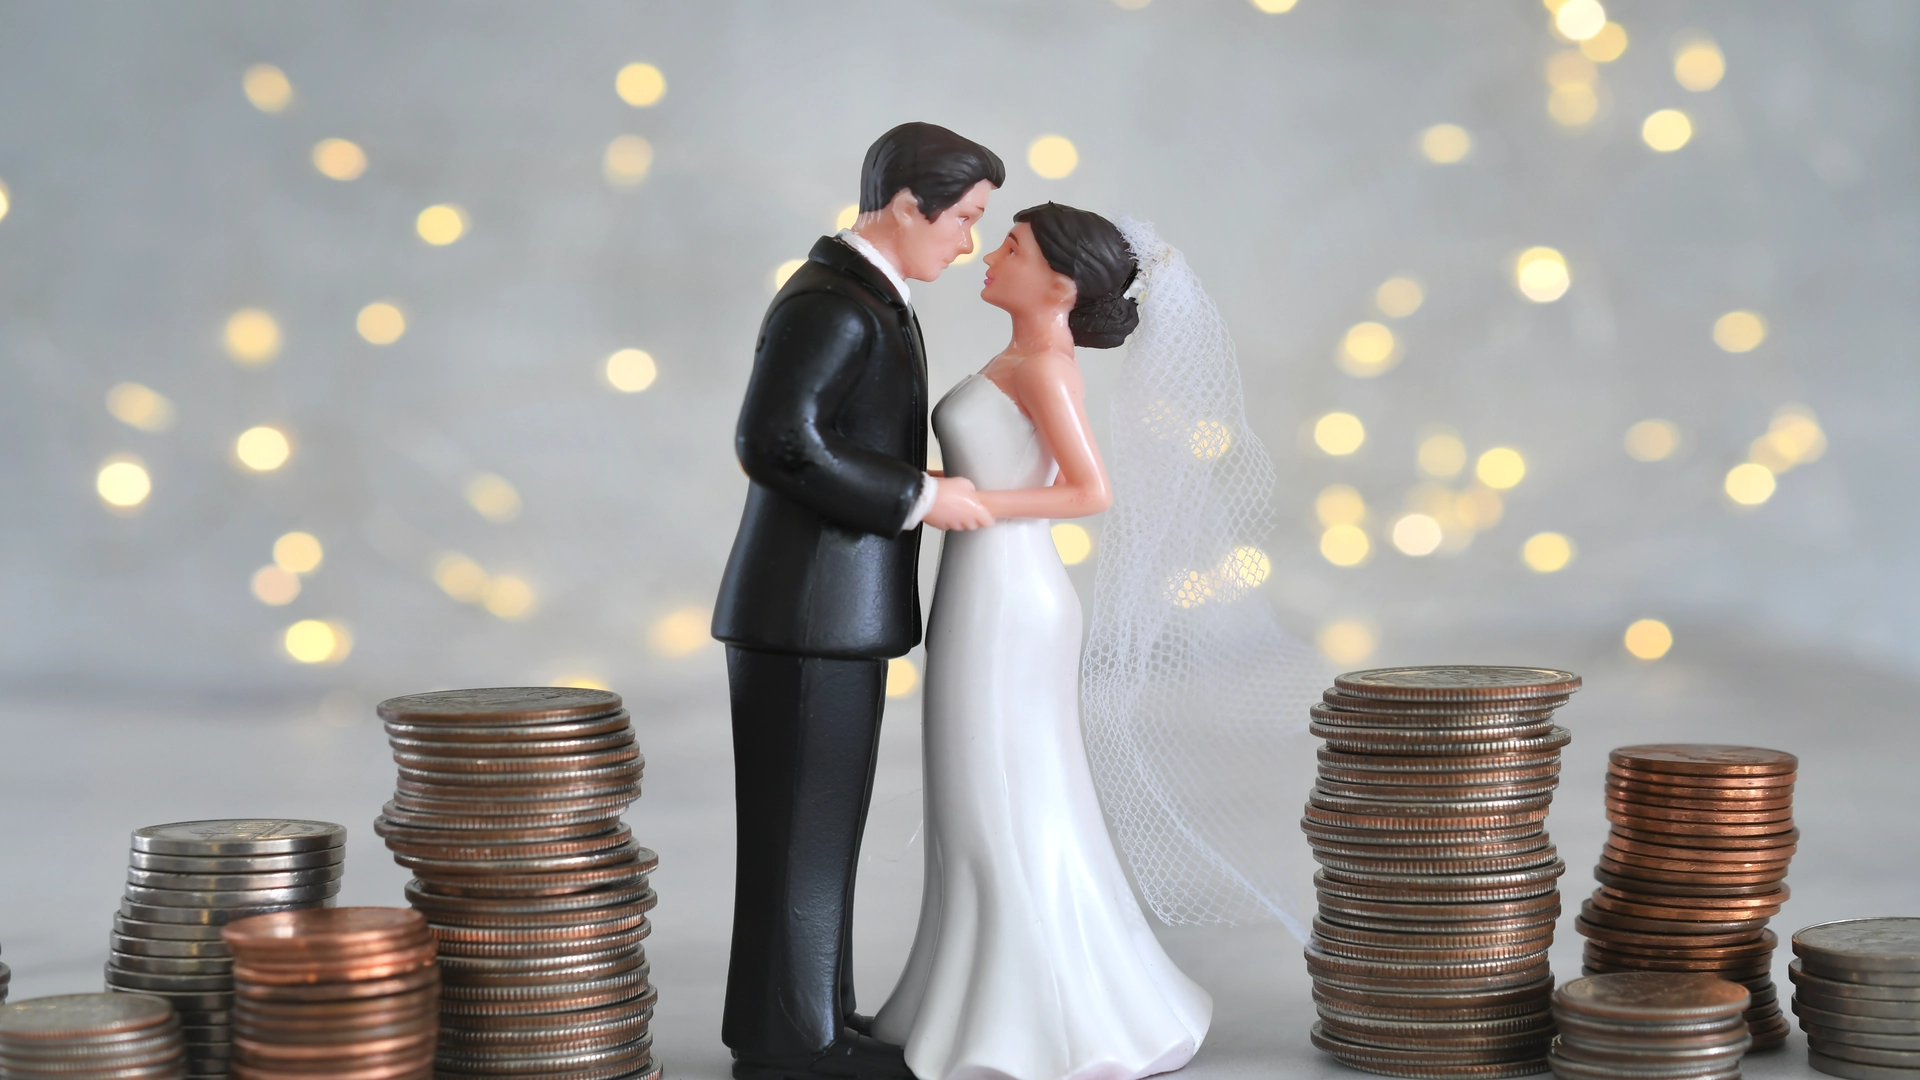 Set Financial Goals for New Couples